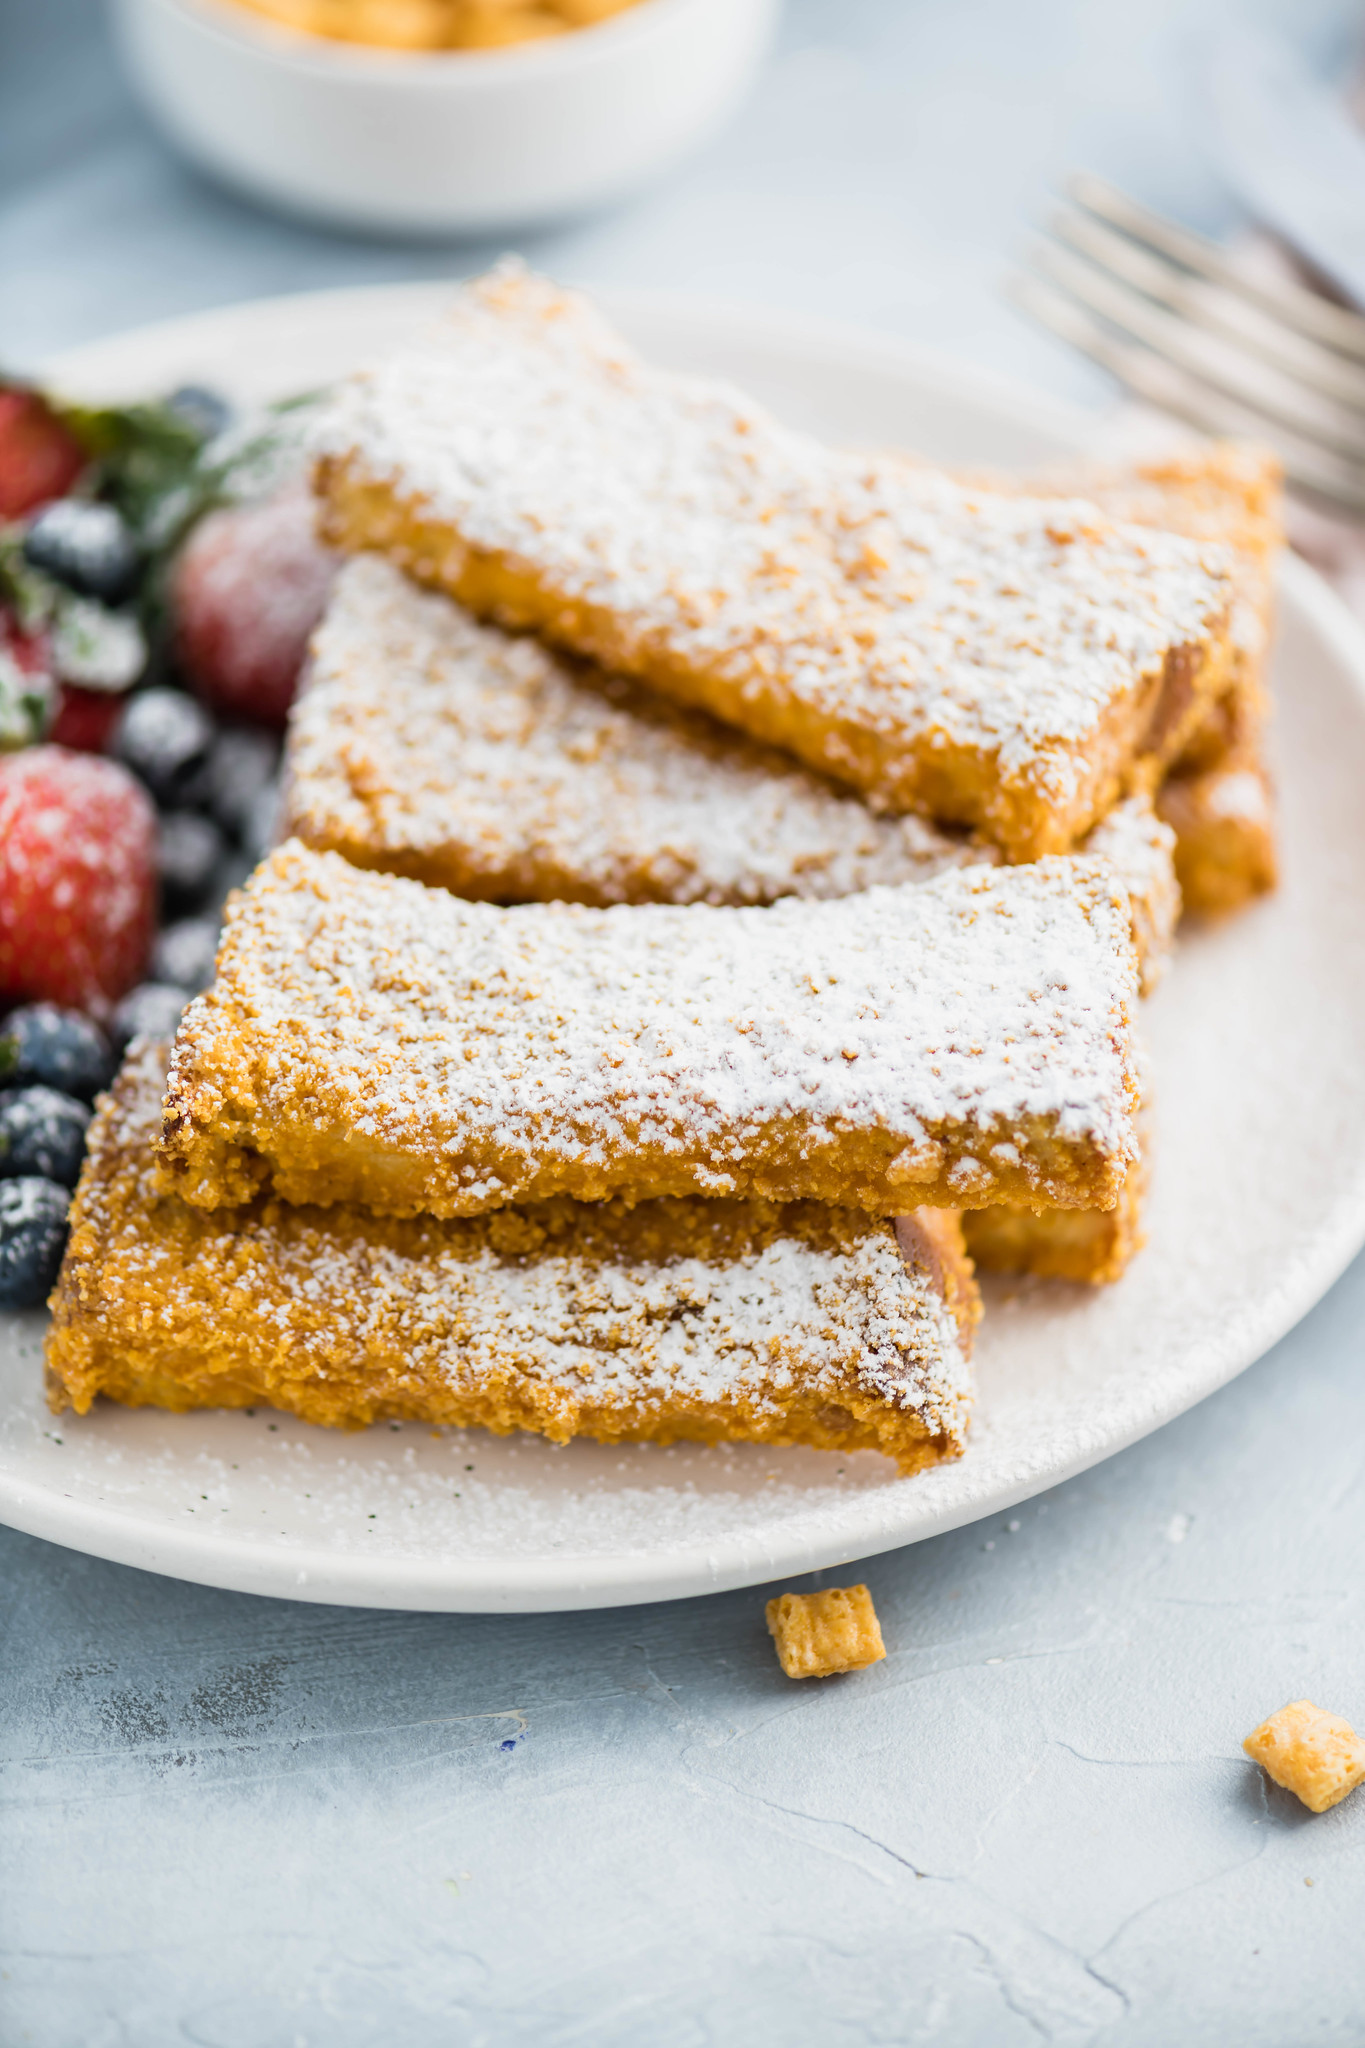 These Crunchy French Toast Sticks are sure to become a family favorite. Thick cut bread cut into sticks and coated in your favorite cereal crumbs.